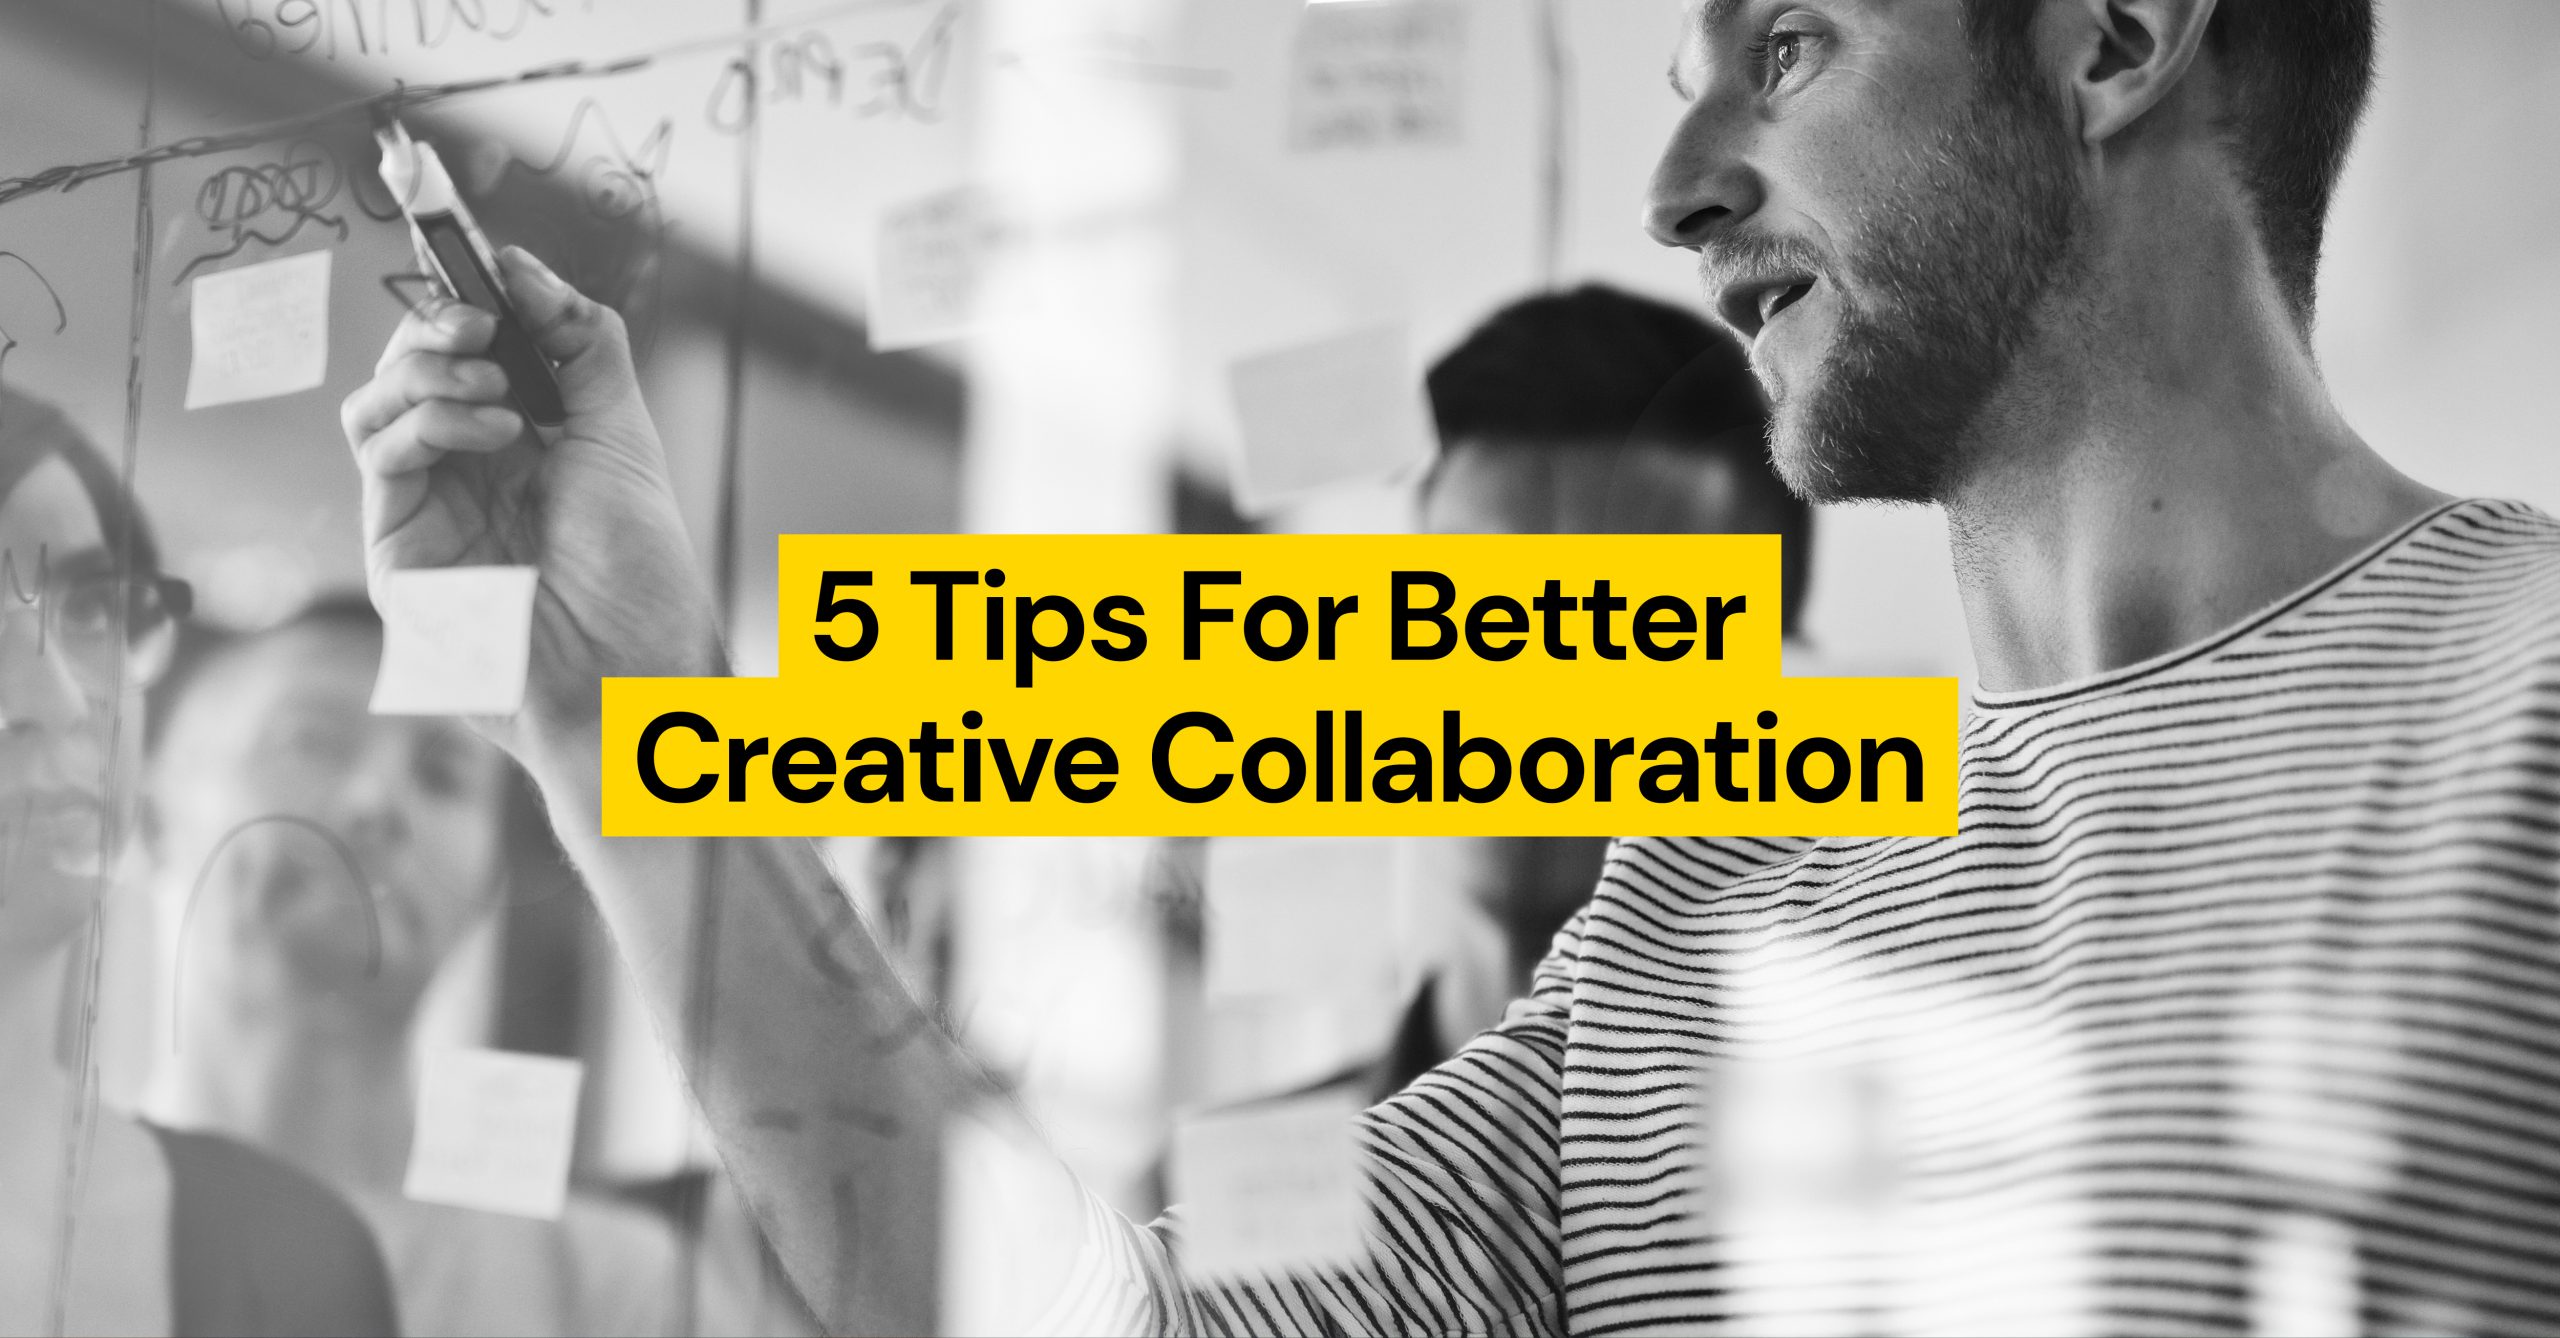 5 Tips For Better Creative Collaboration